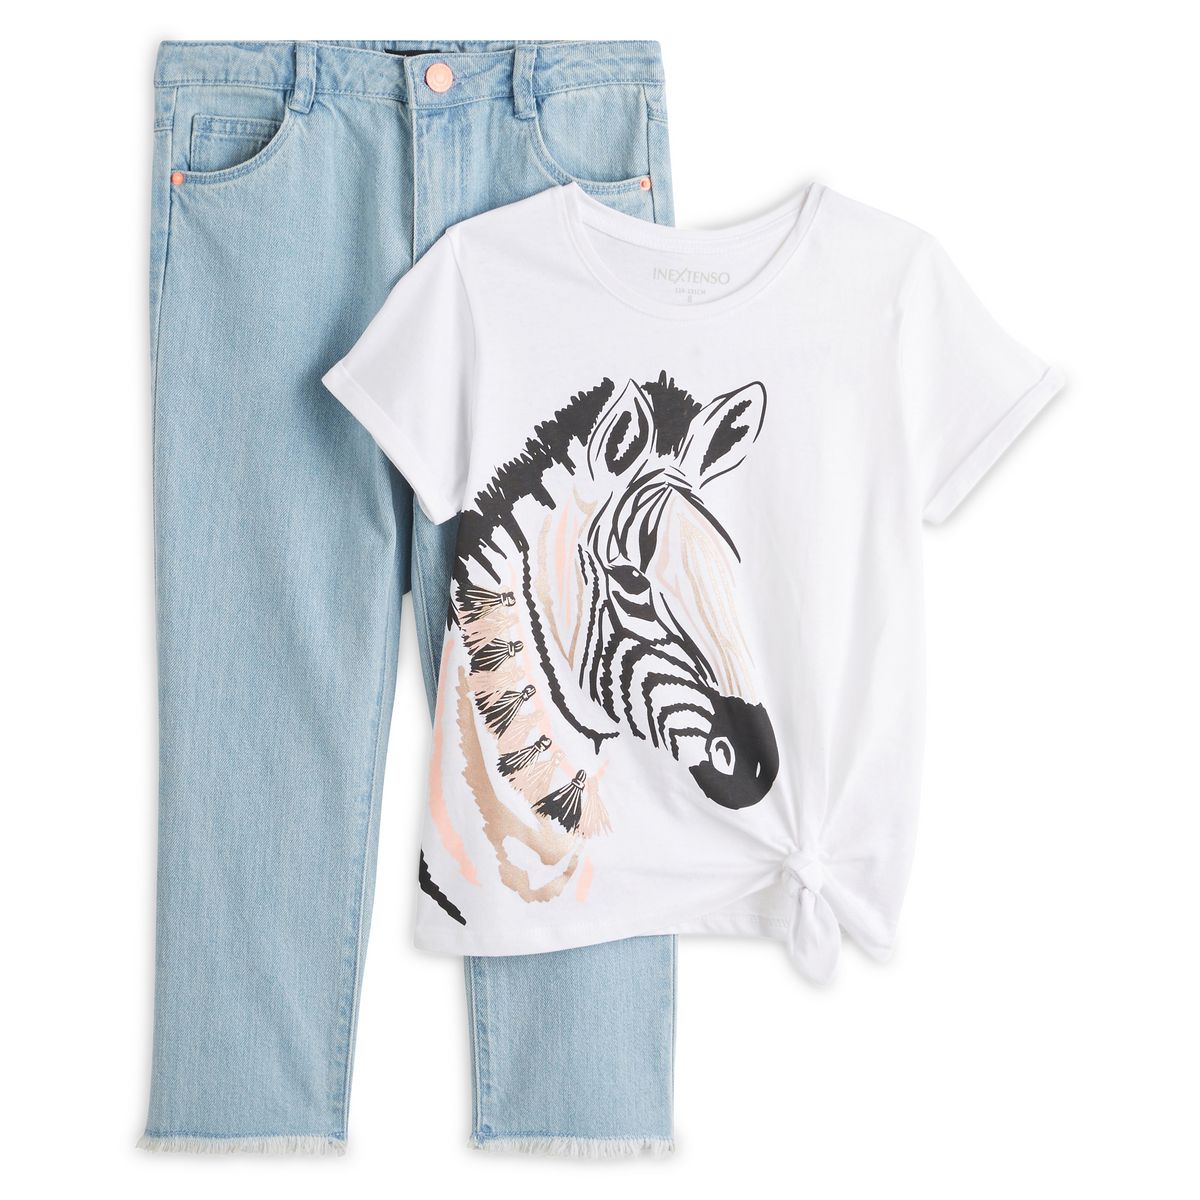 IN EXTENSO Ensemble T-shirt manches courtes + jean fille